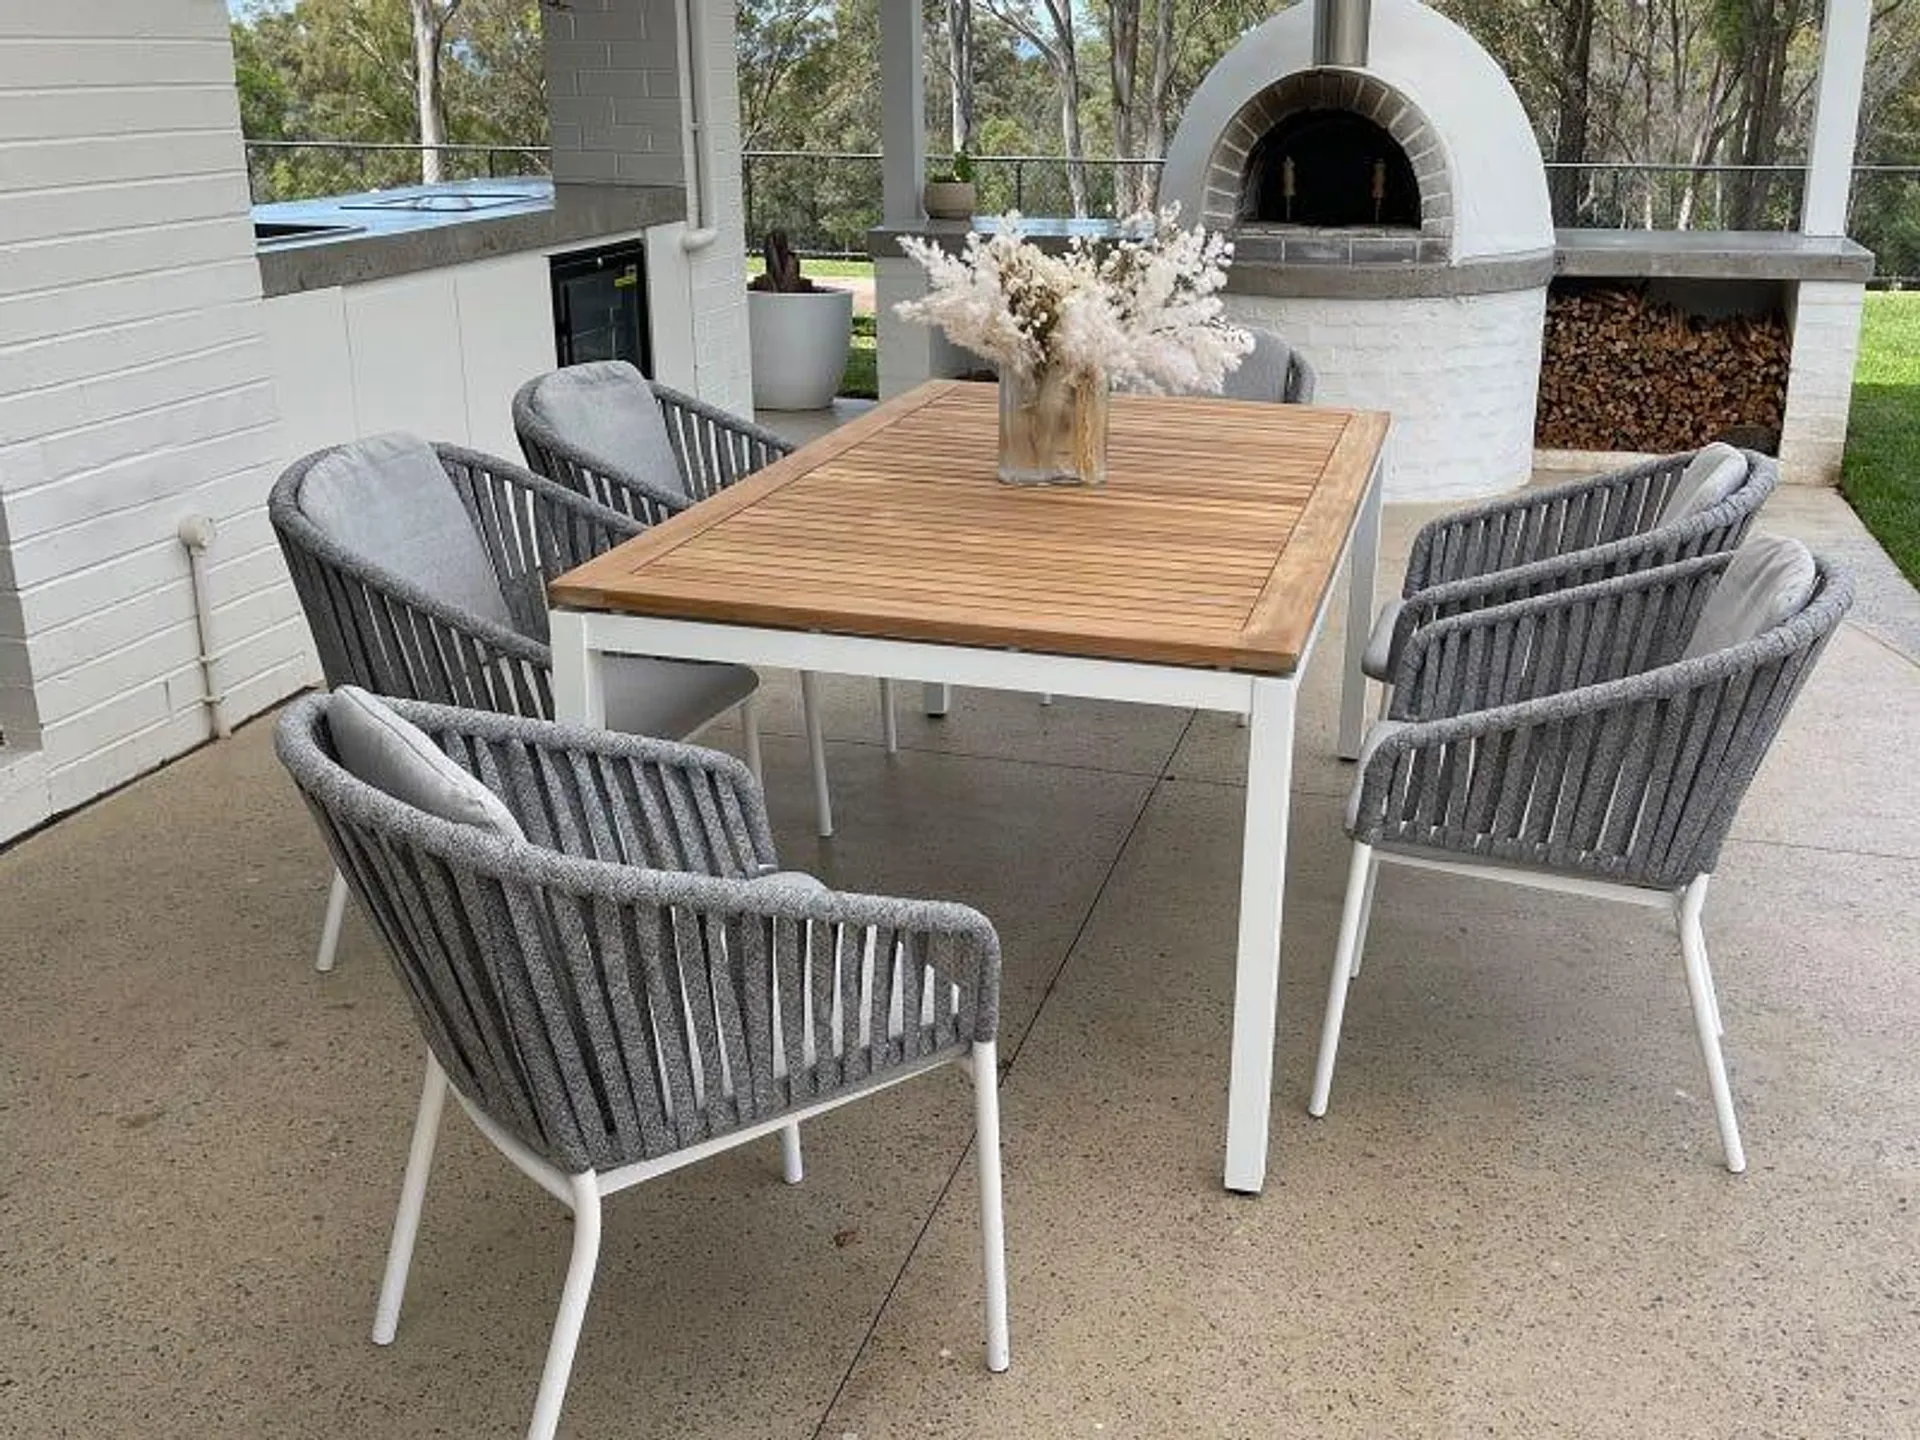 Barcelona Table with Melang Chairs 7pc Outdoor Dining Setting